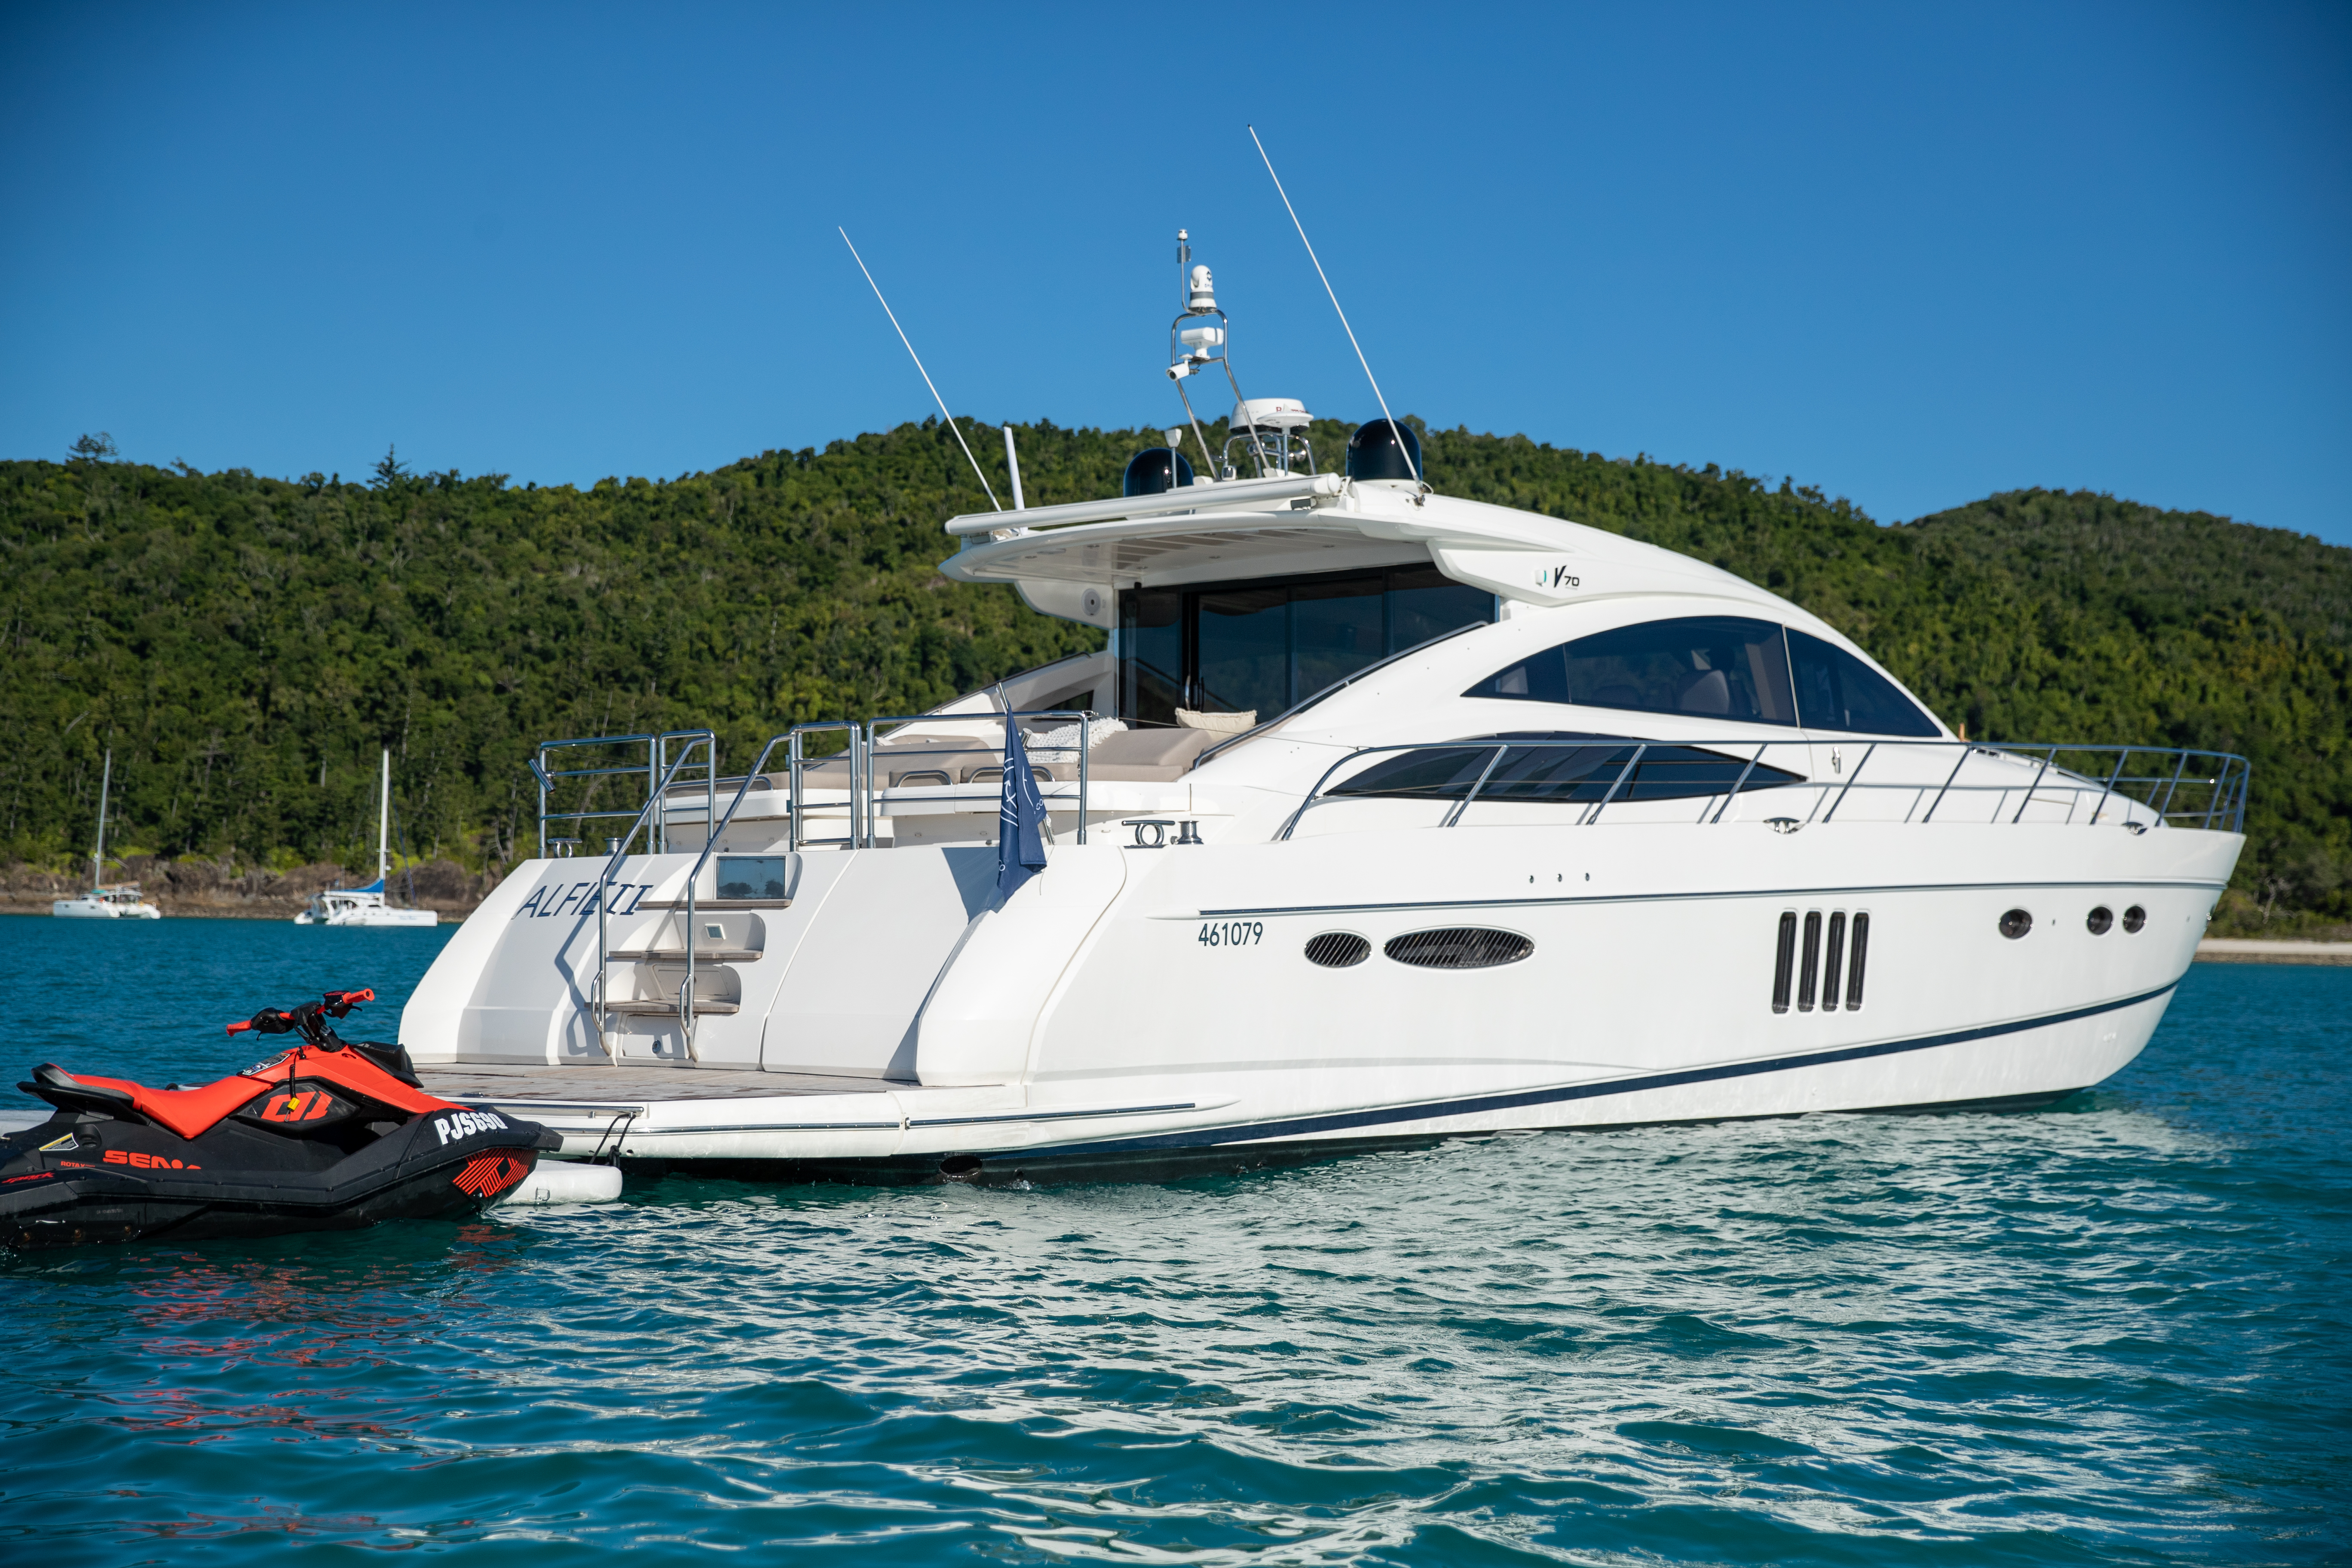 Luxury Boat Charters, YACHTS, About, Our Services, Contact